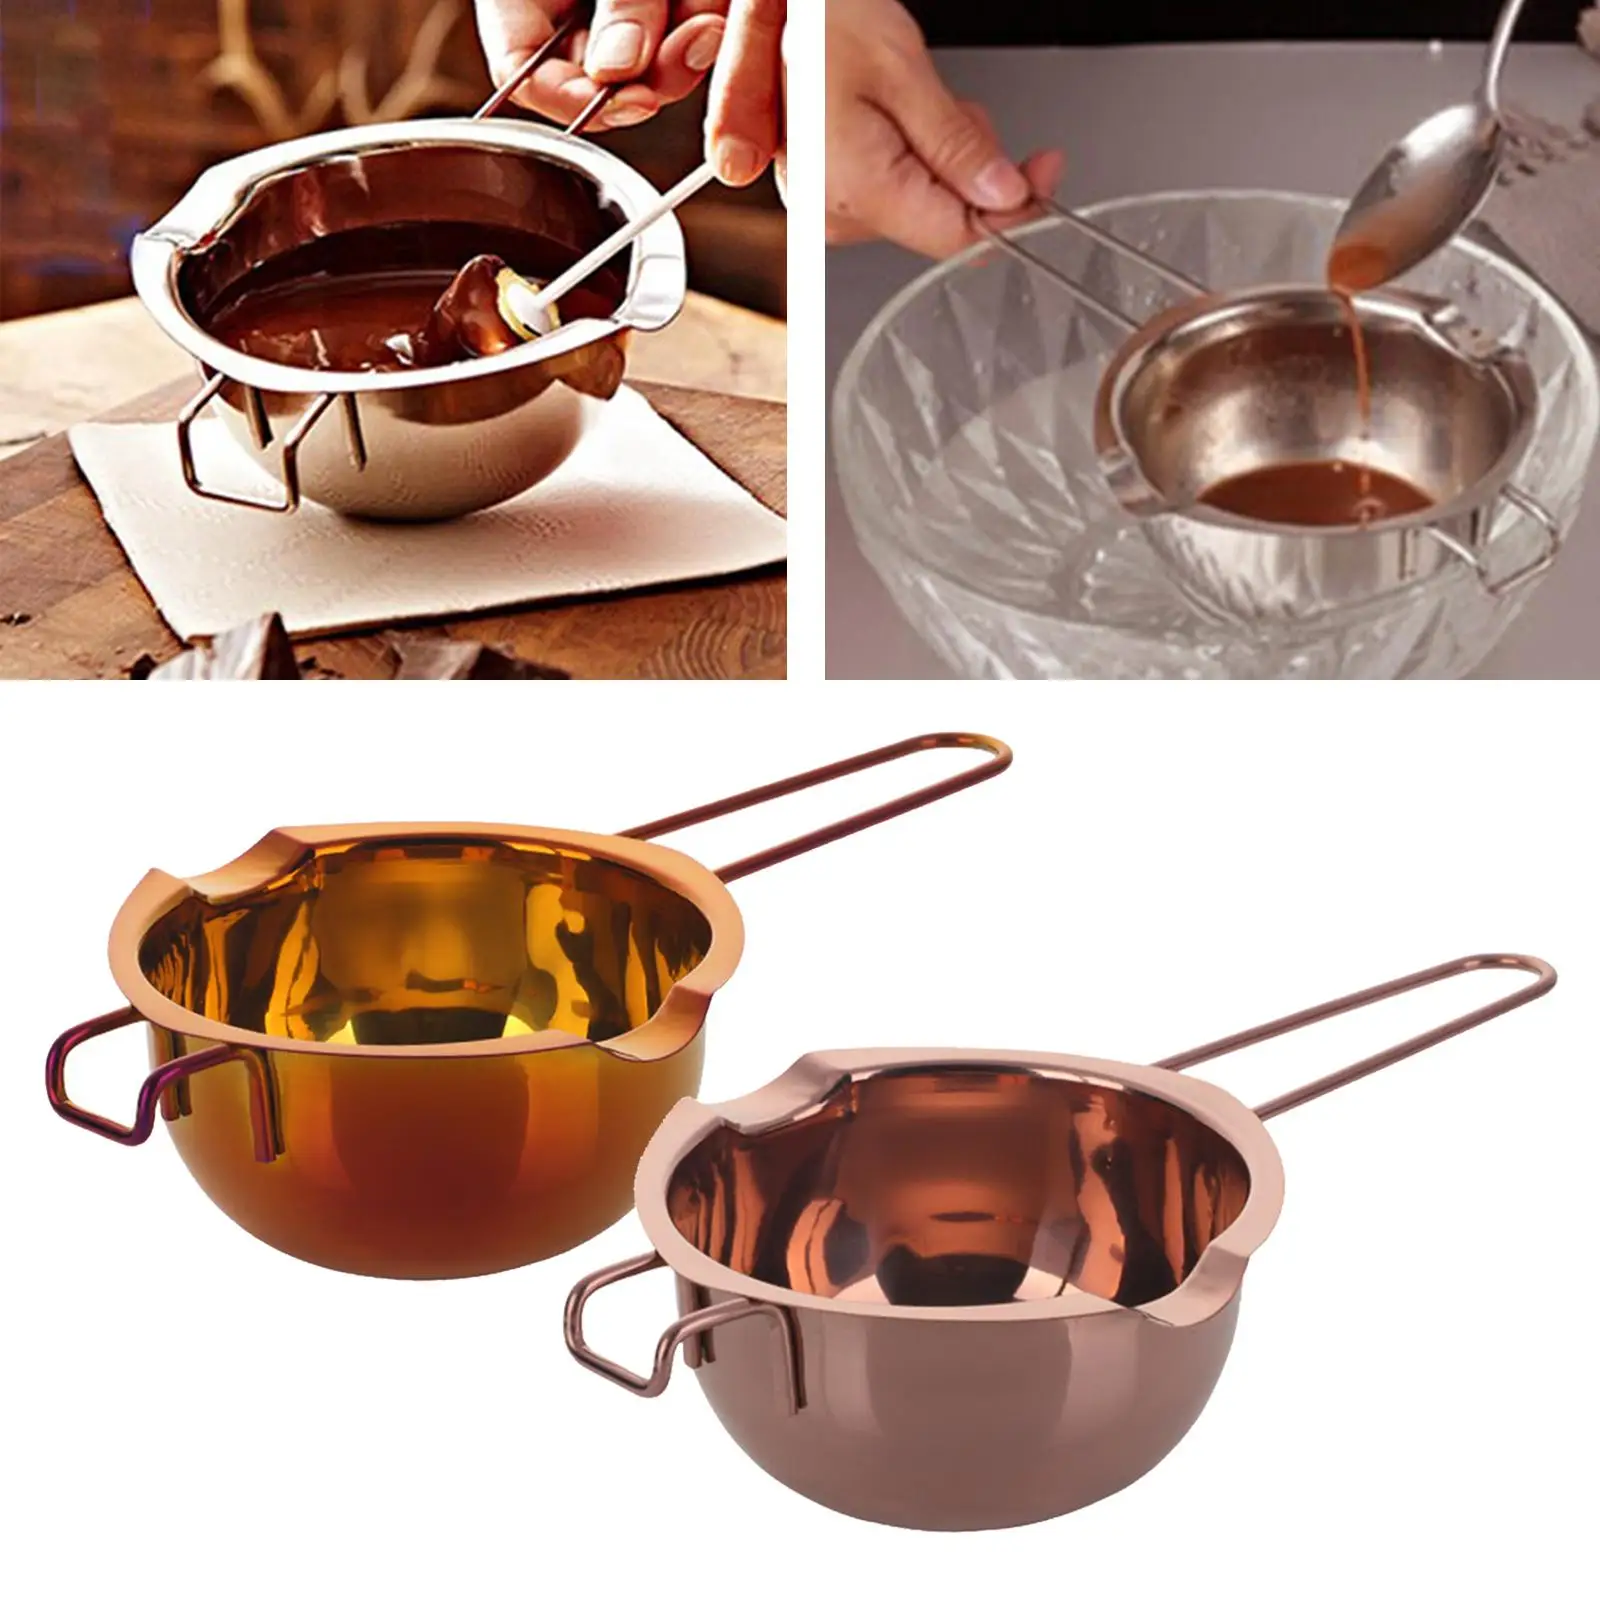 Stainless Steel Double Boiler Metls Pot 400ml for Melting Chocolate 13.4oz